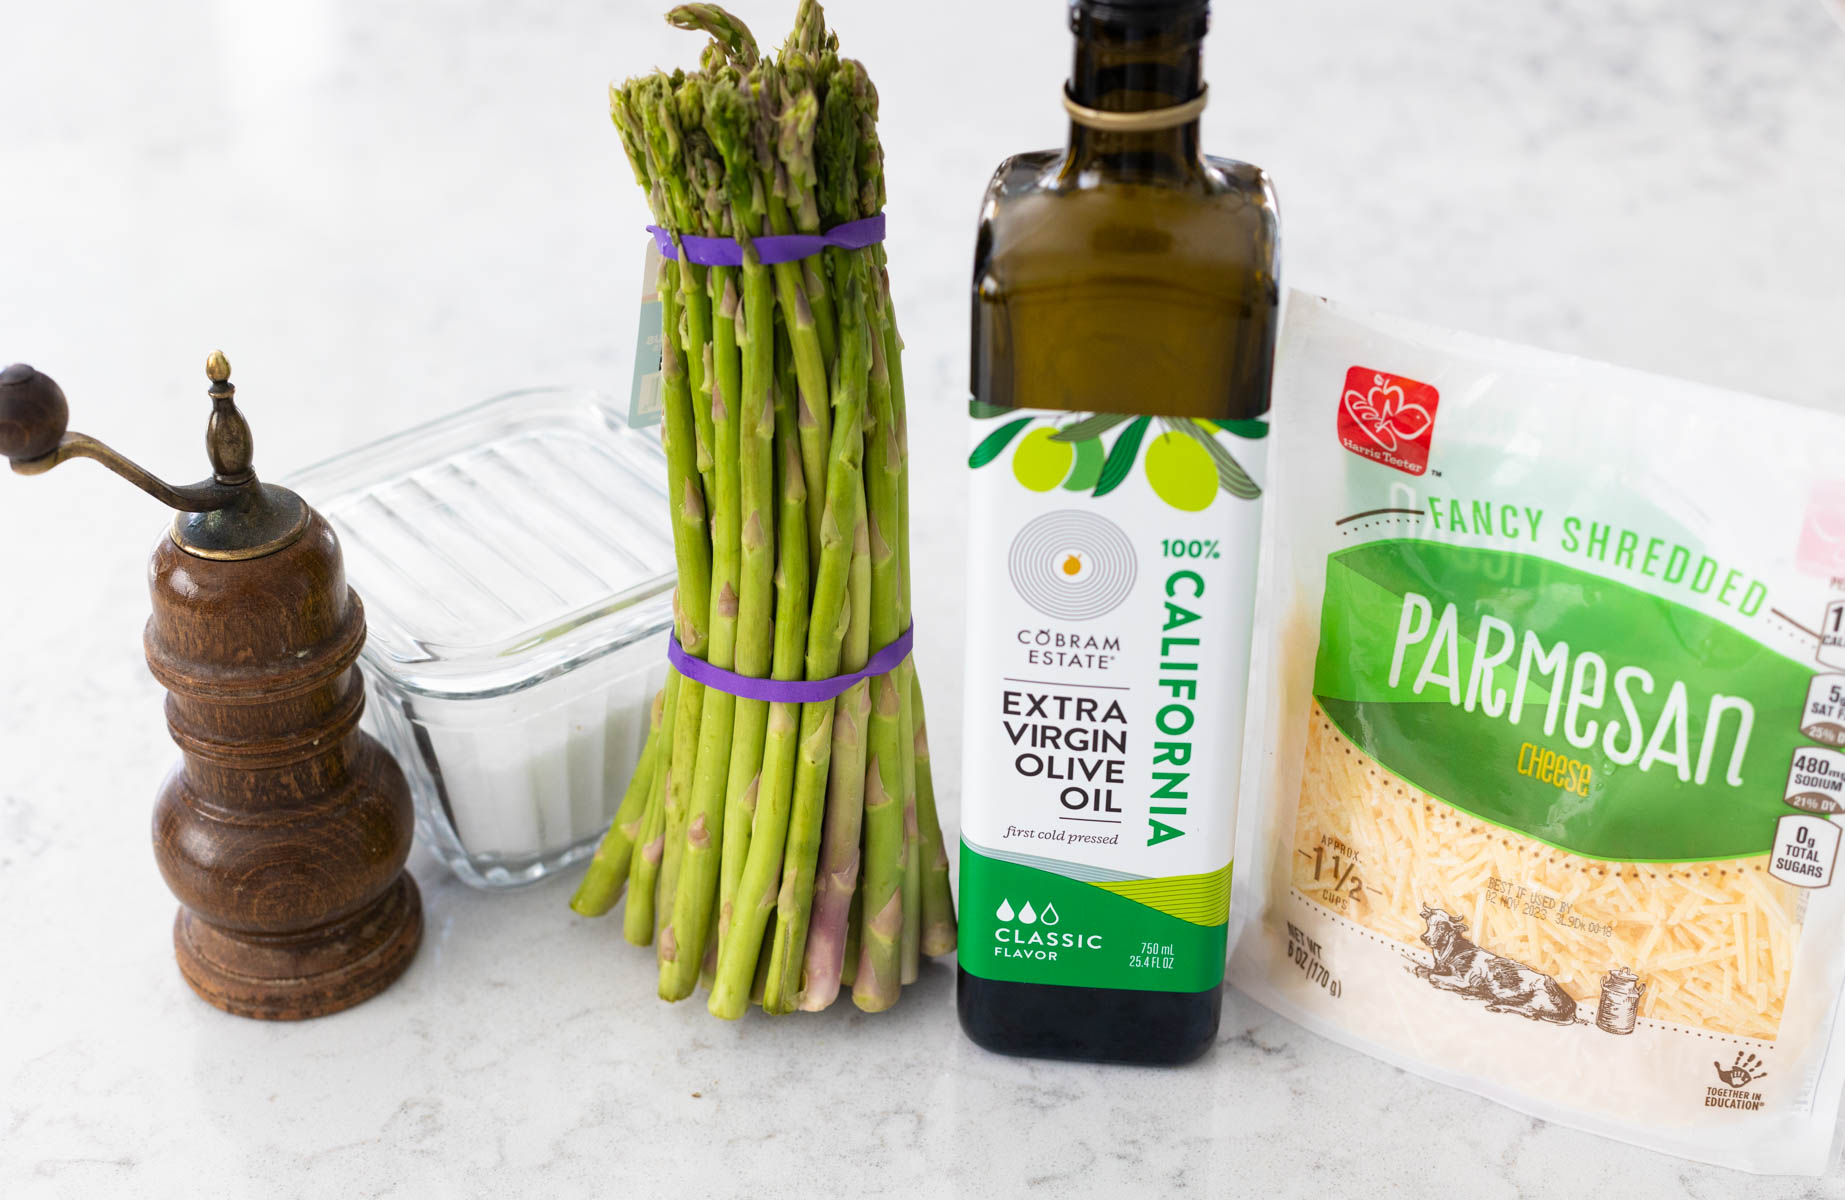 The ingredients to make the roasted asparagus are on the counter.